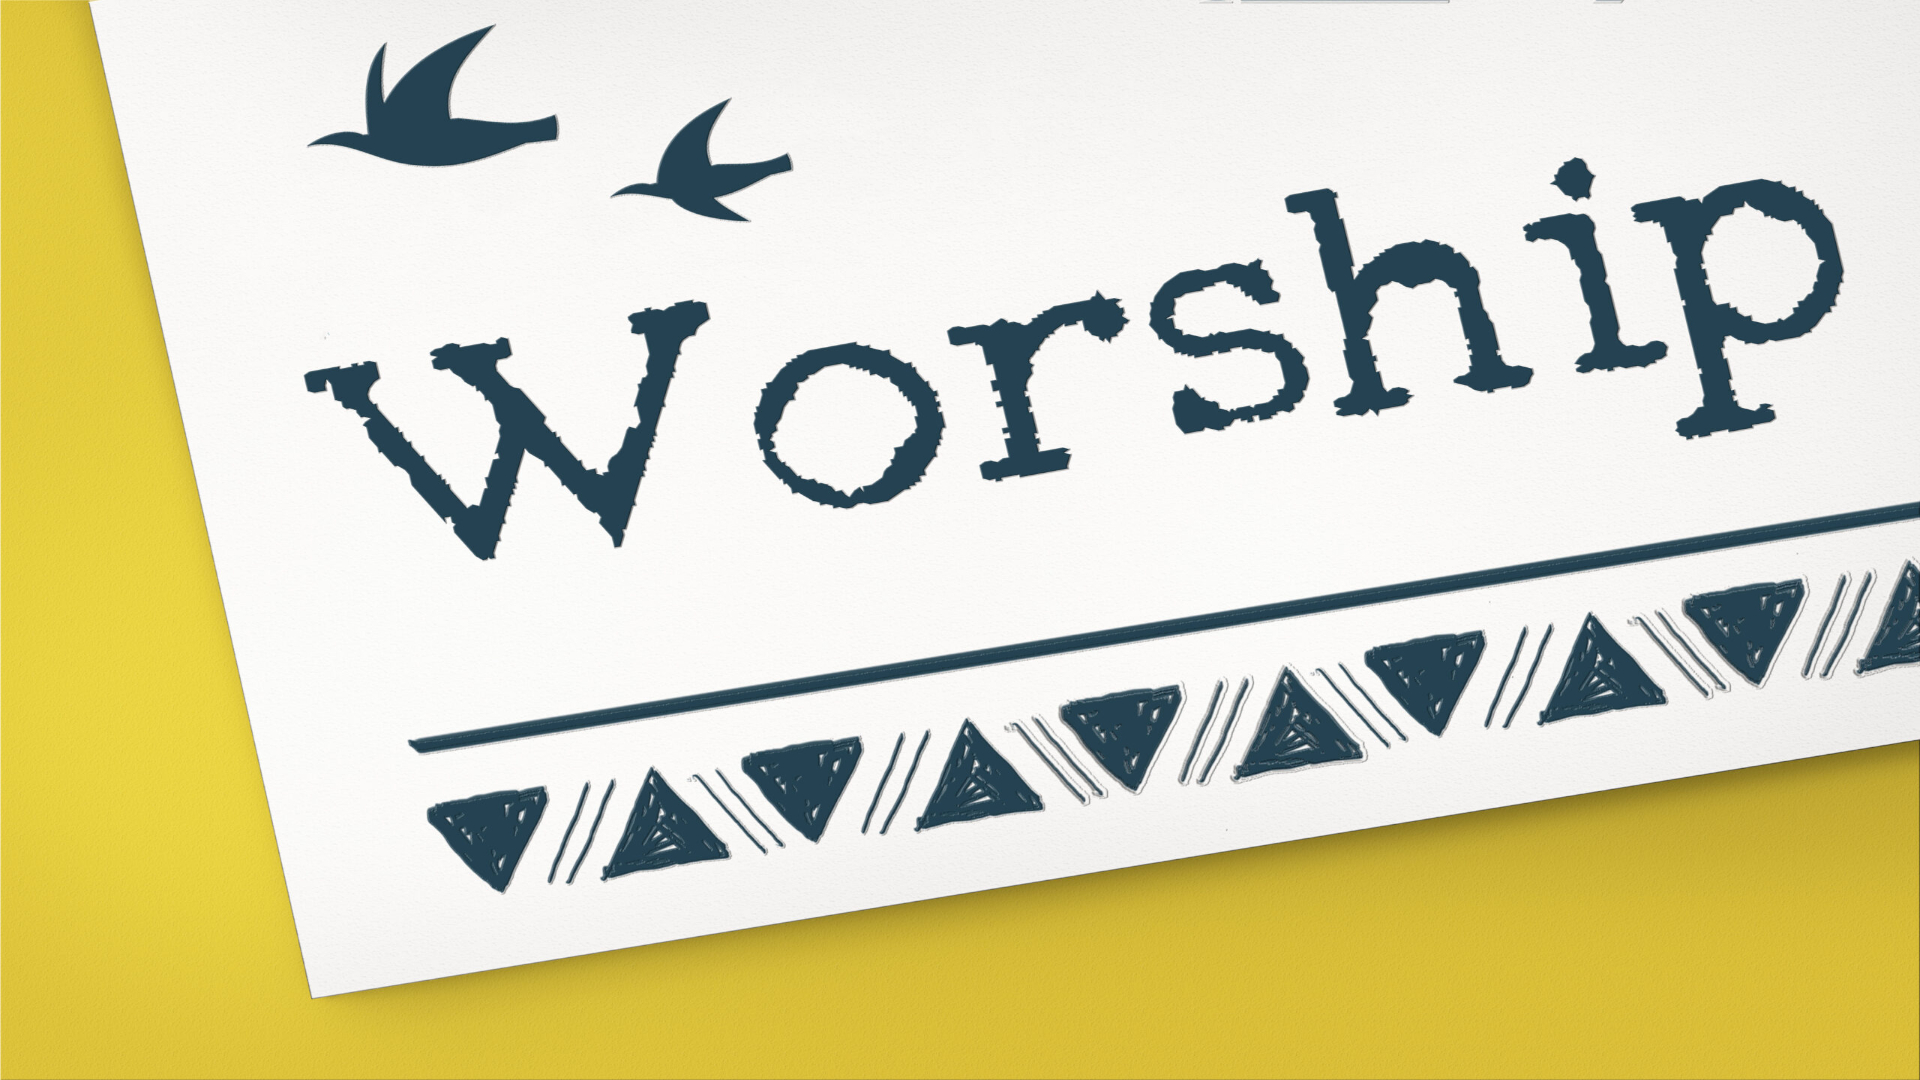 Worship: To Bow and To Change